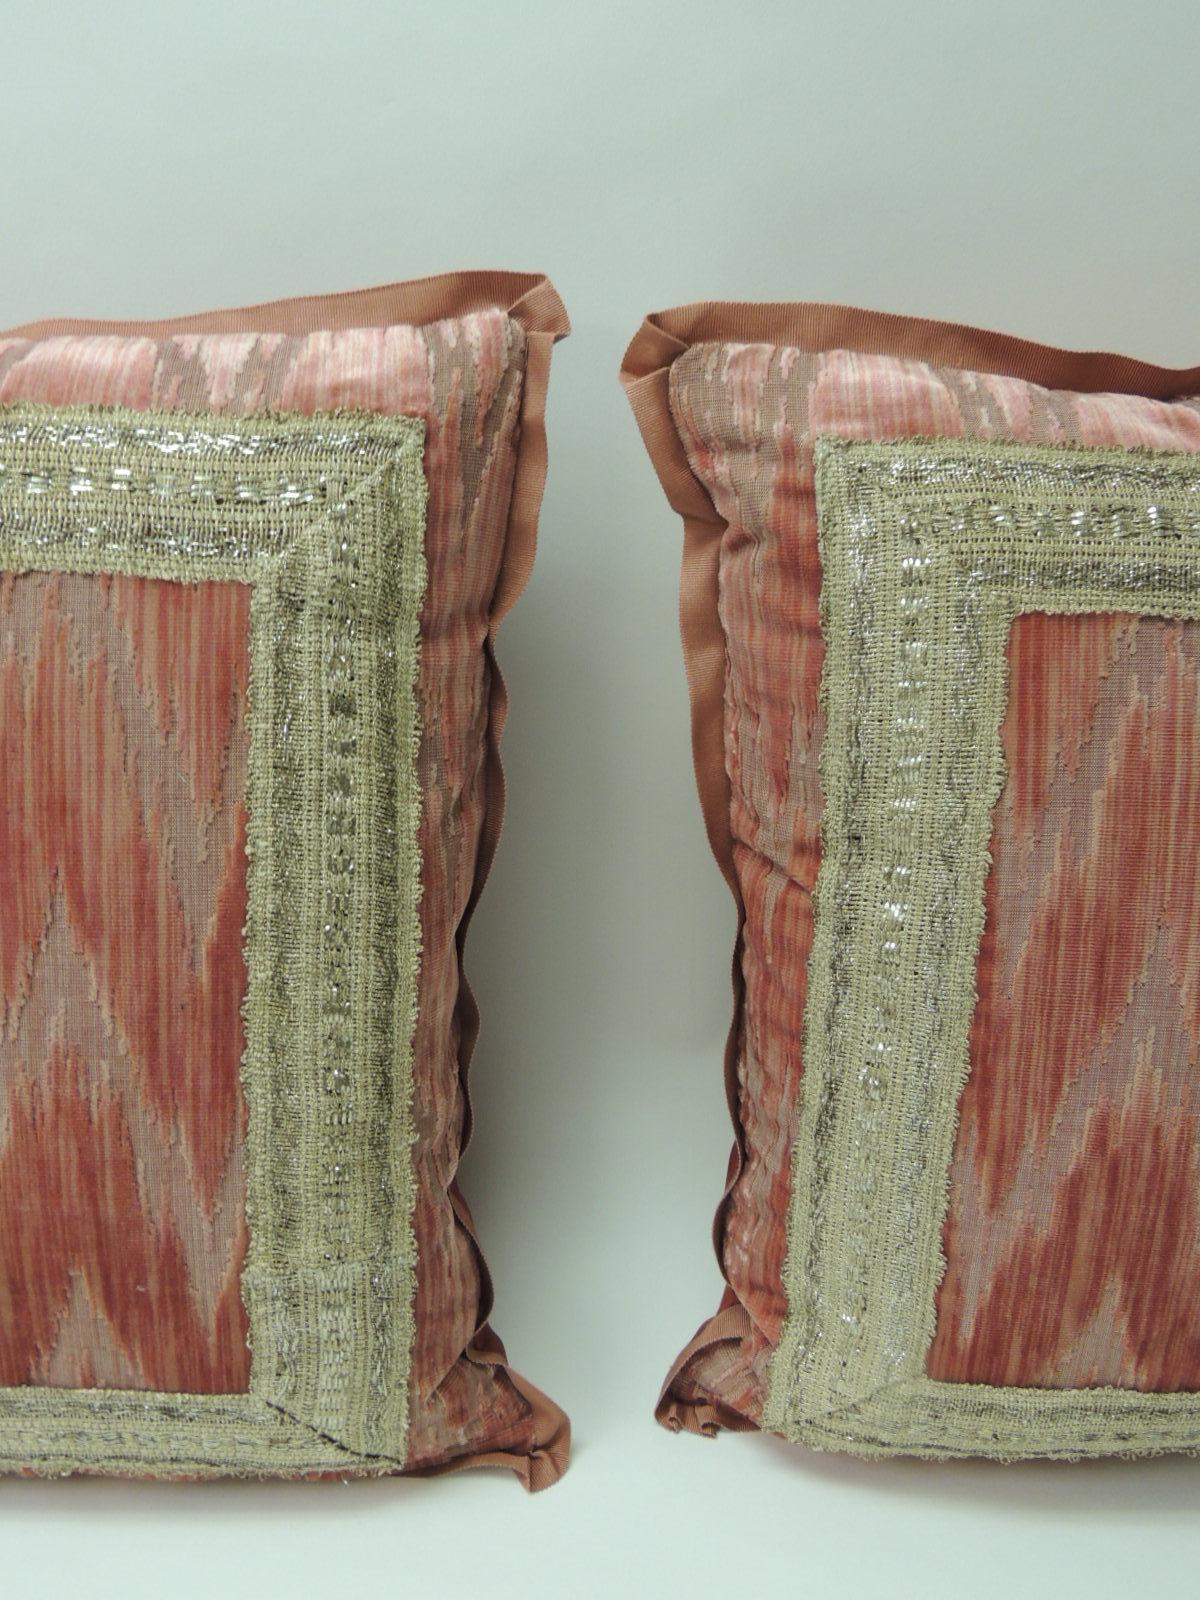 Pair of Antique Pink and Silver Flame Stitch Silk Velvet Decorative Pillows.
Dusty pink and silver silk velvet flame stitch square decorative pillows. The front silk velvet on the pillows is adorned with a 19th century heavy woven silver metallic